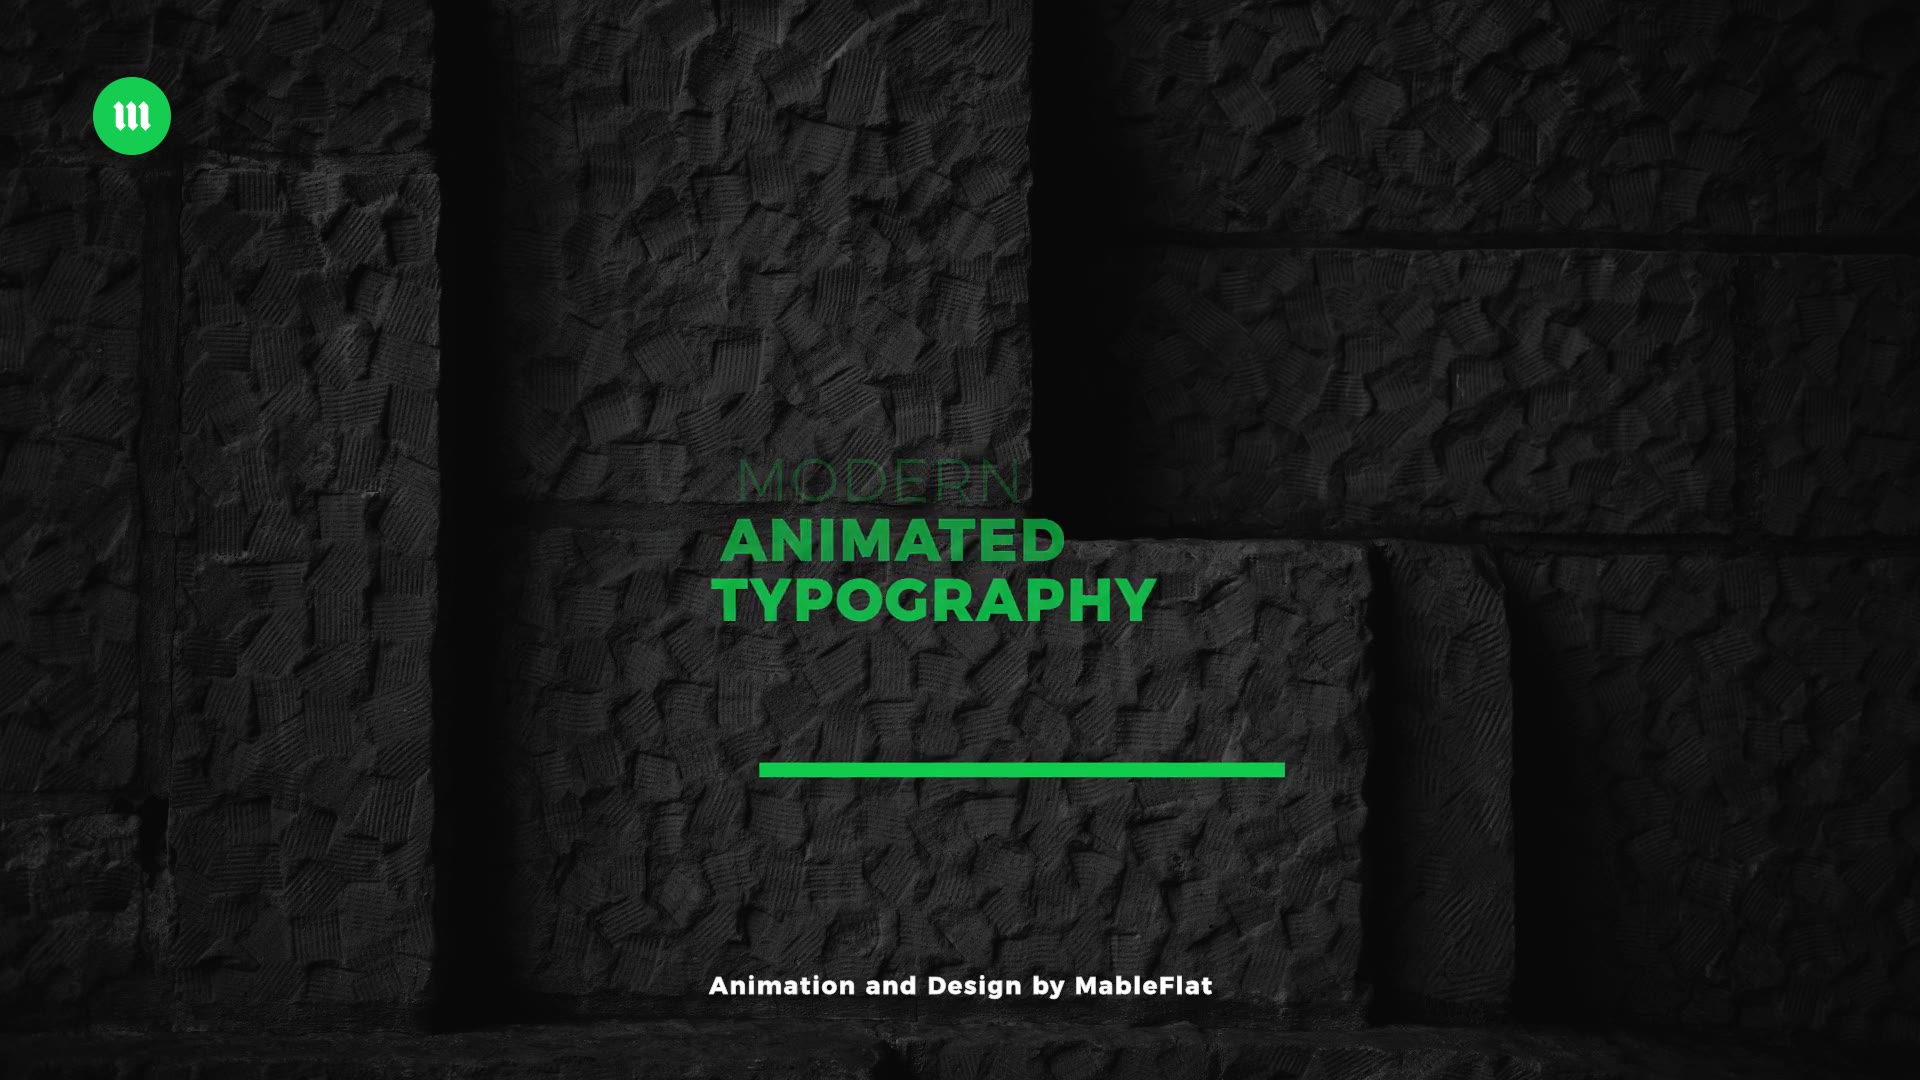 Simple Titles - Download Videohive 22188972